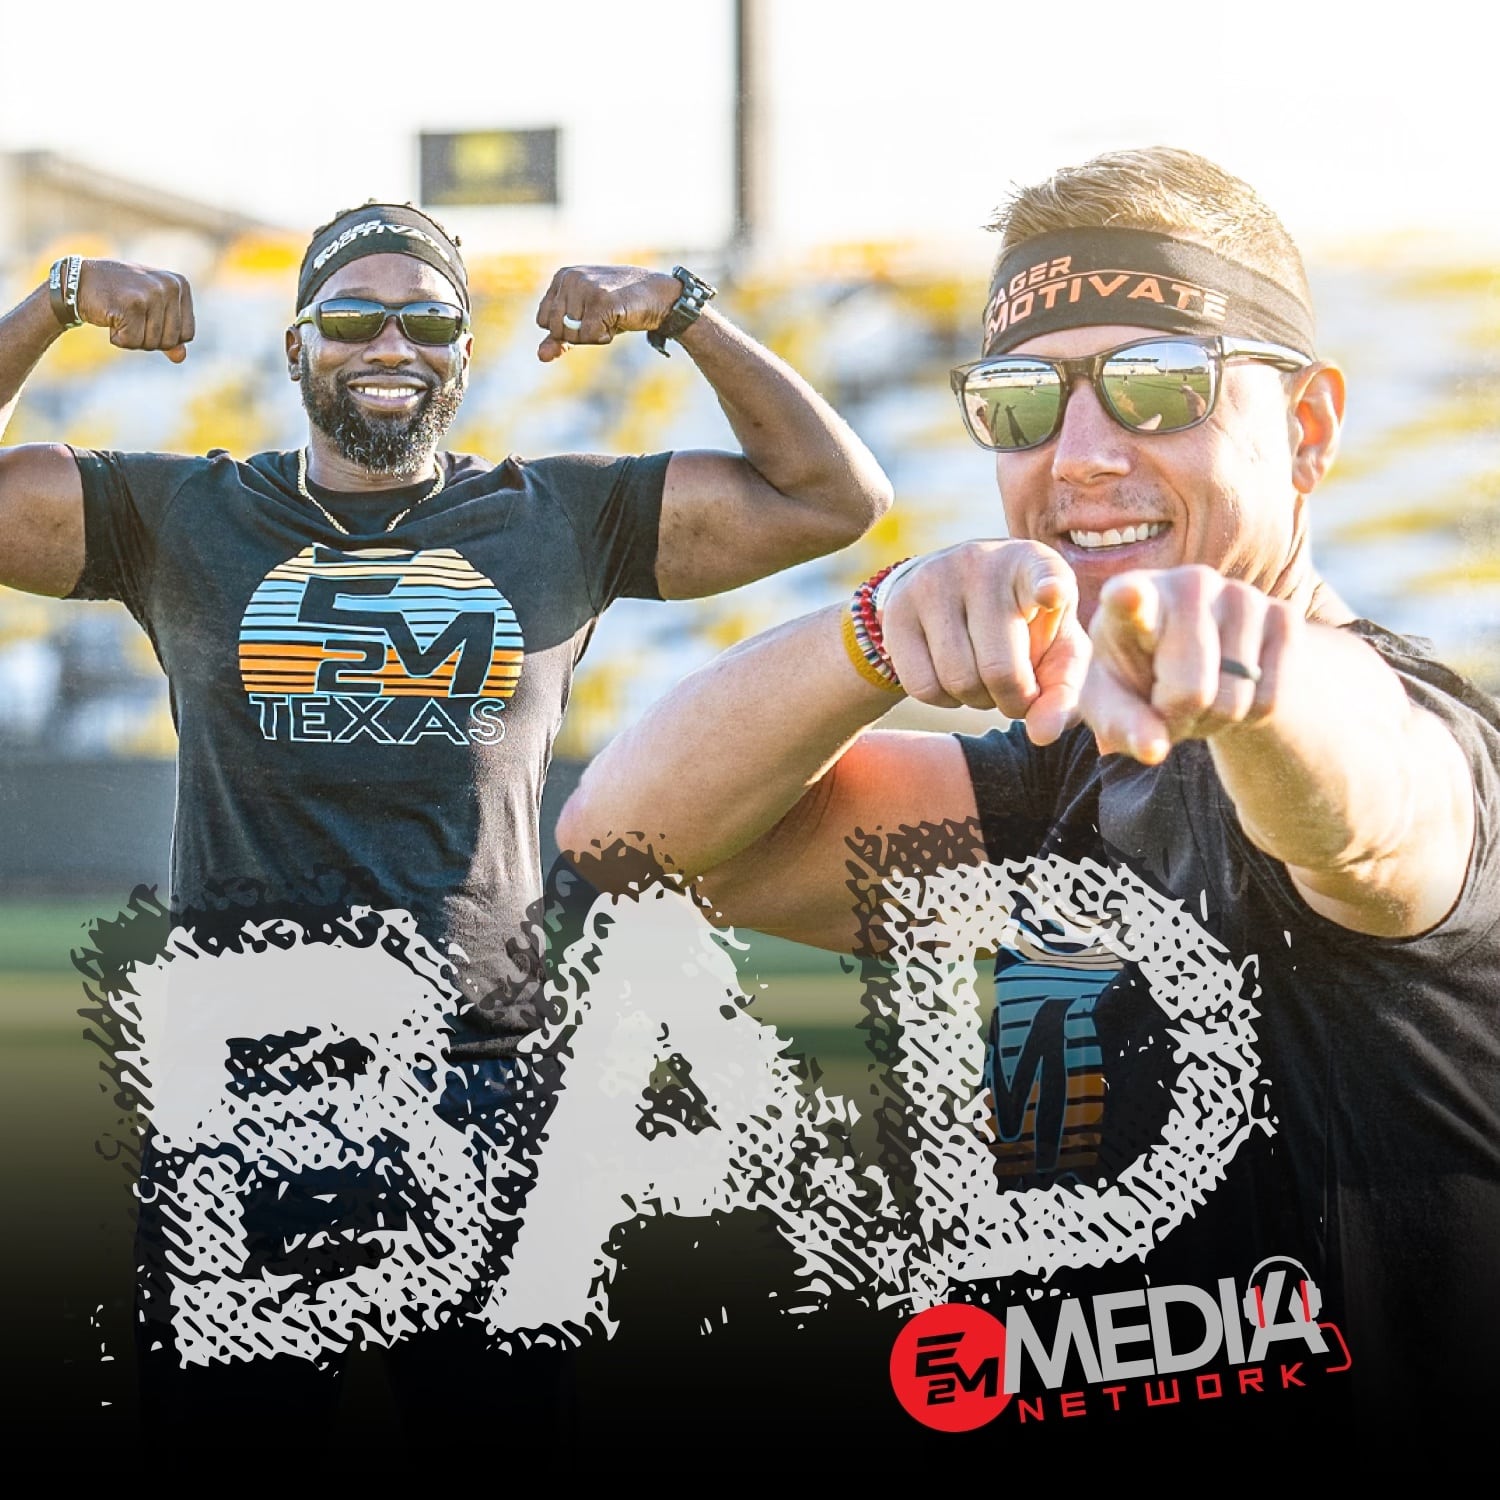 BAD Podcast – Activation “It’s time to wake your greatness.”